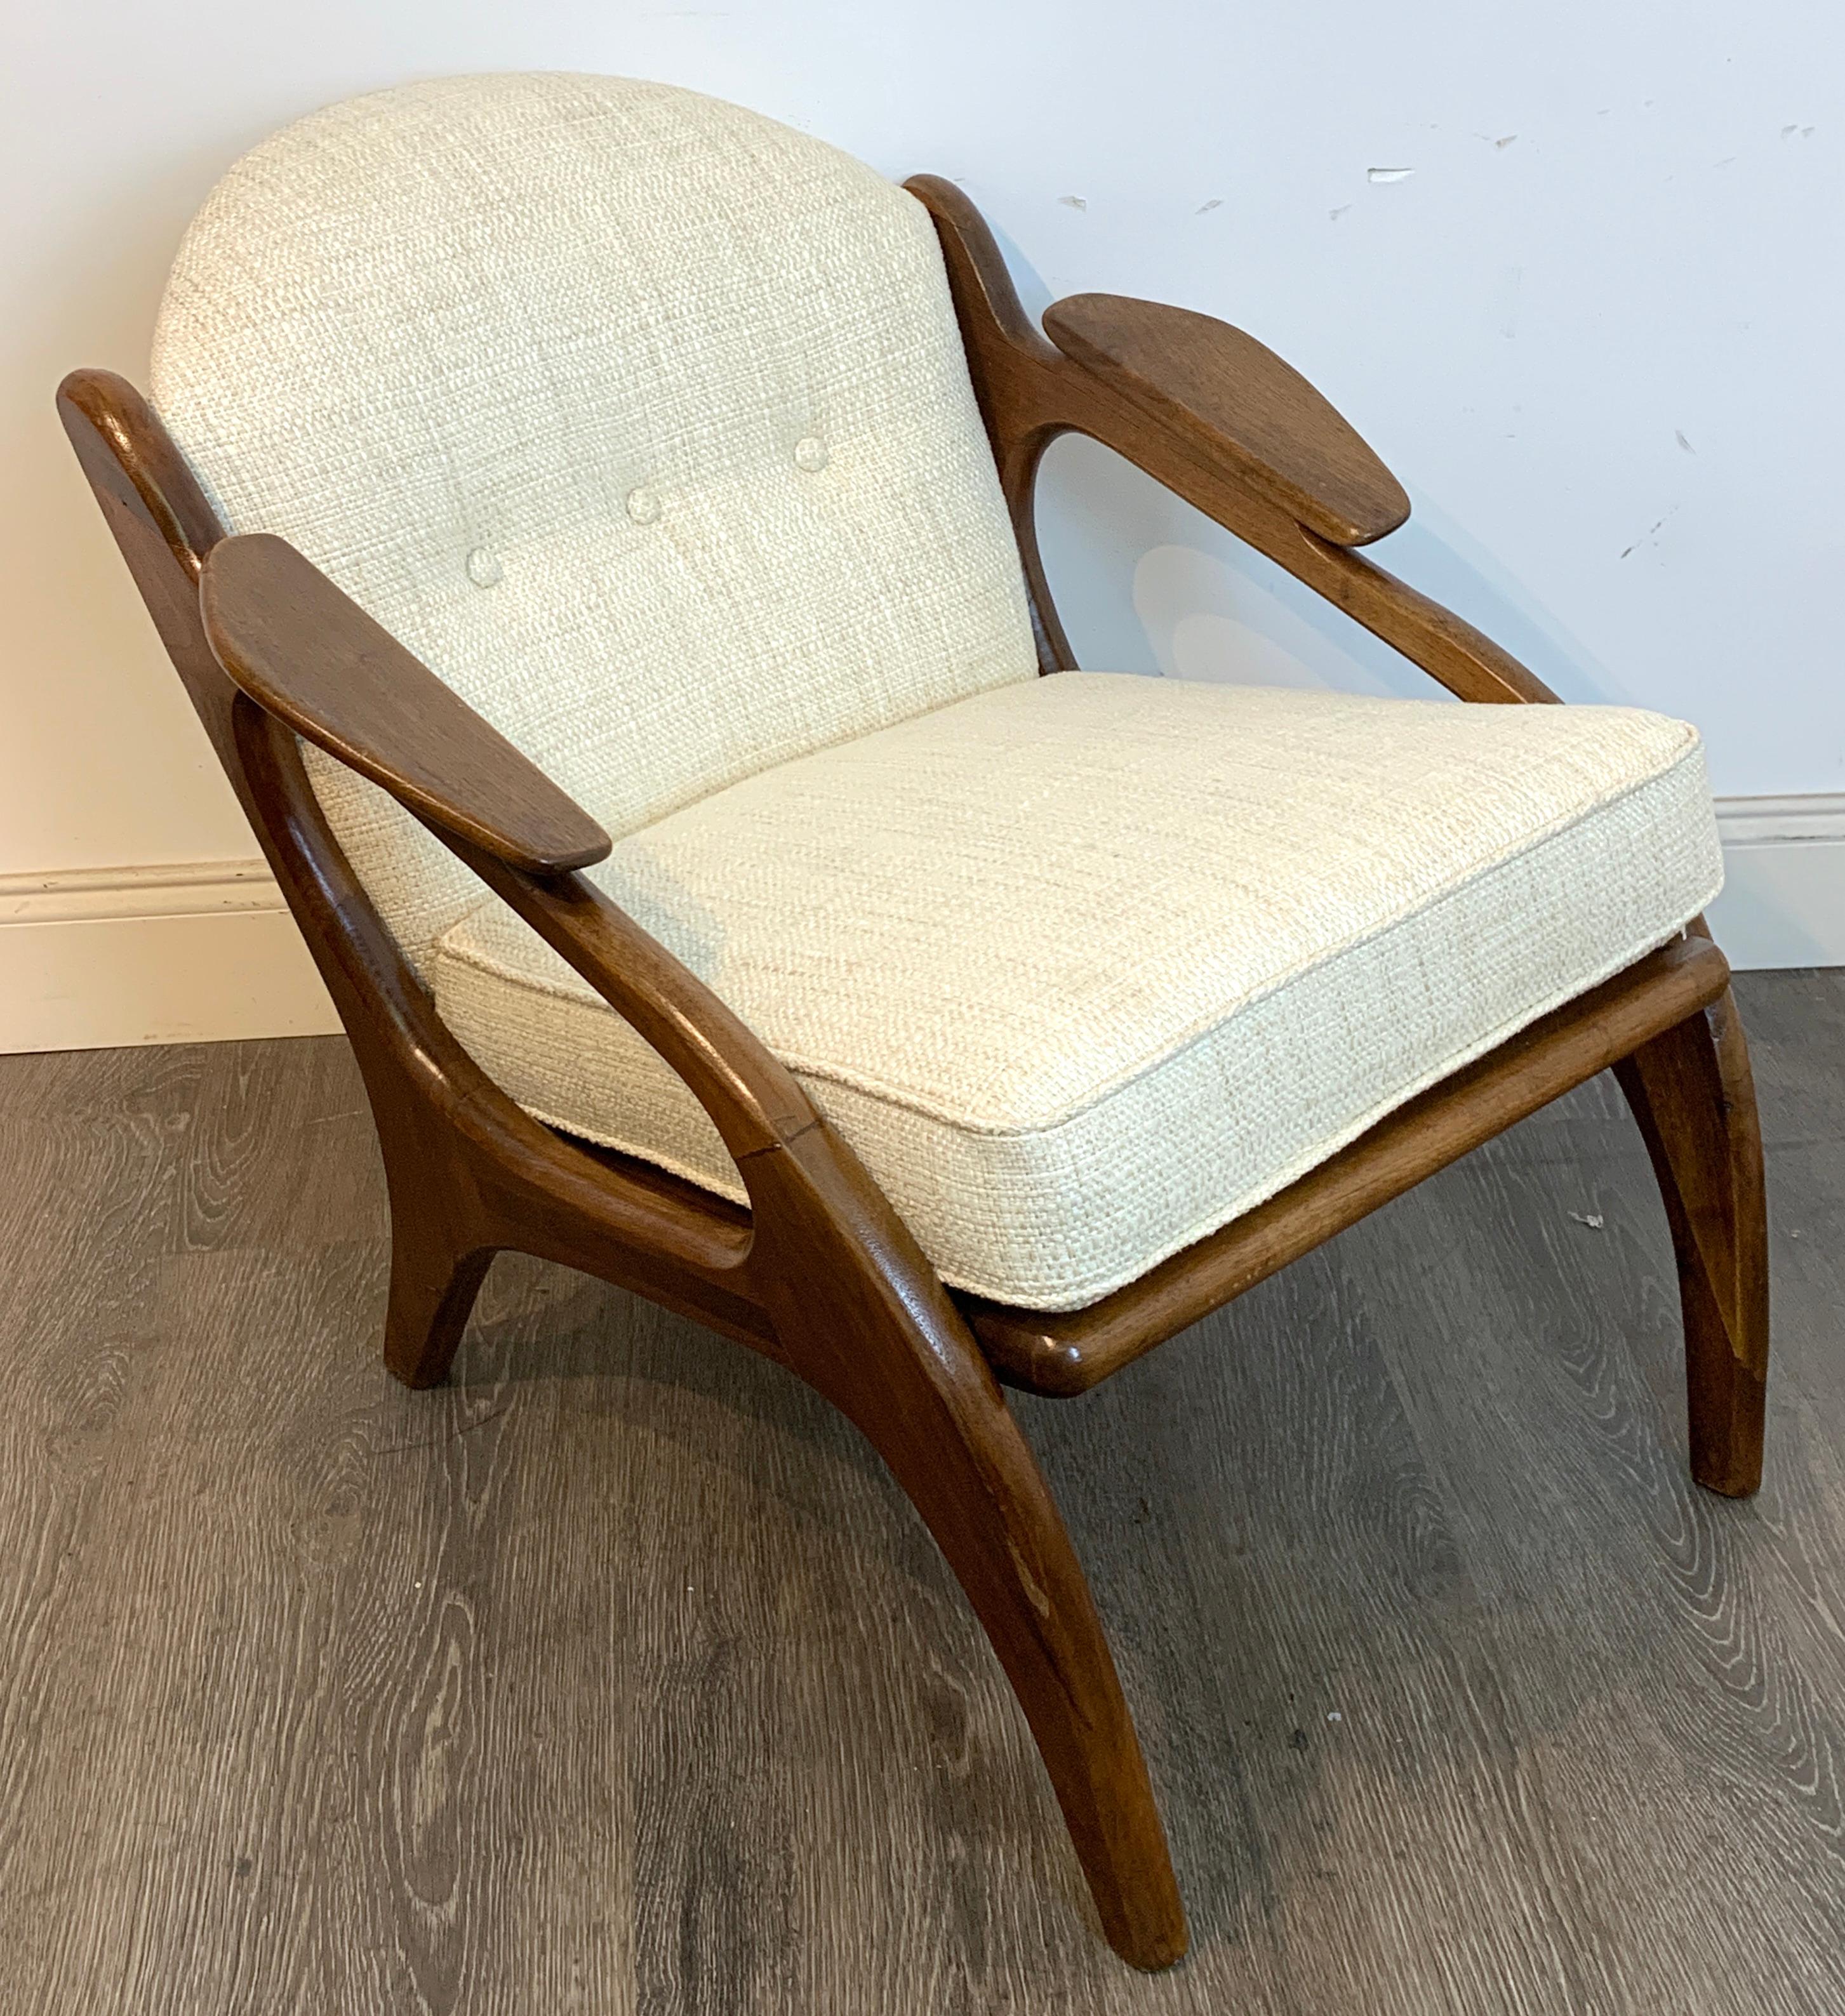 Mid-Century Modern Adrian Pearsall Craft Associates lounge chair #2249-C, with scoop armrests, newly upholstered in neutral Kravet fabric
Armrest height 20